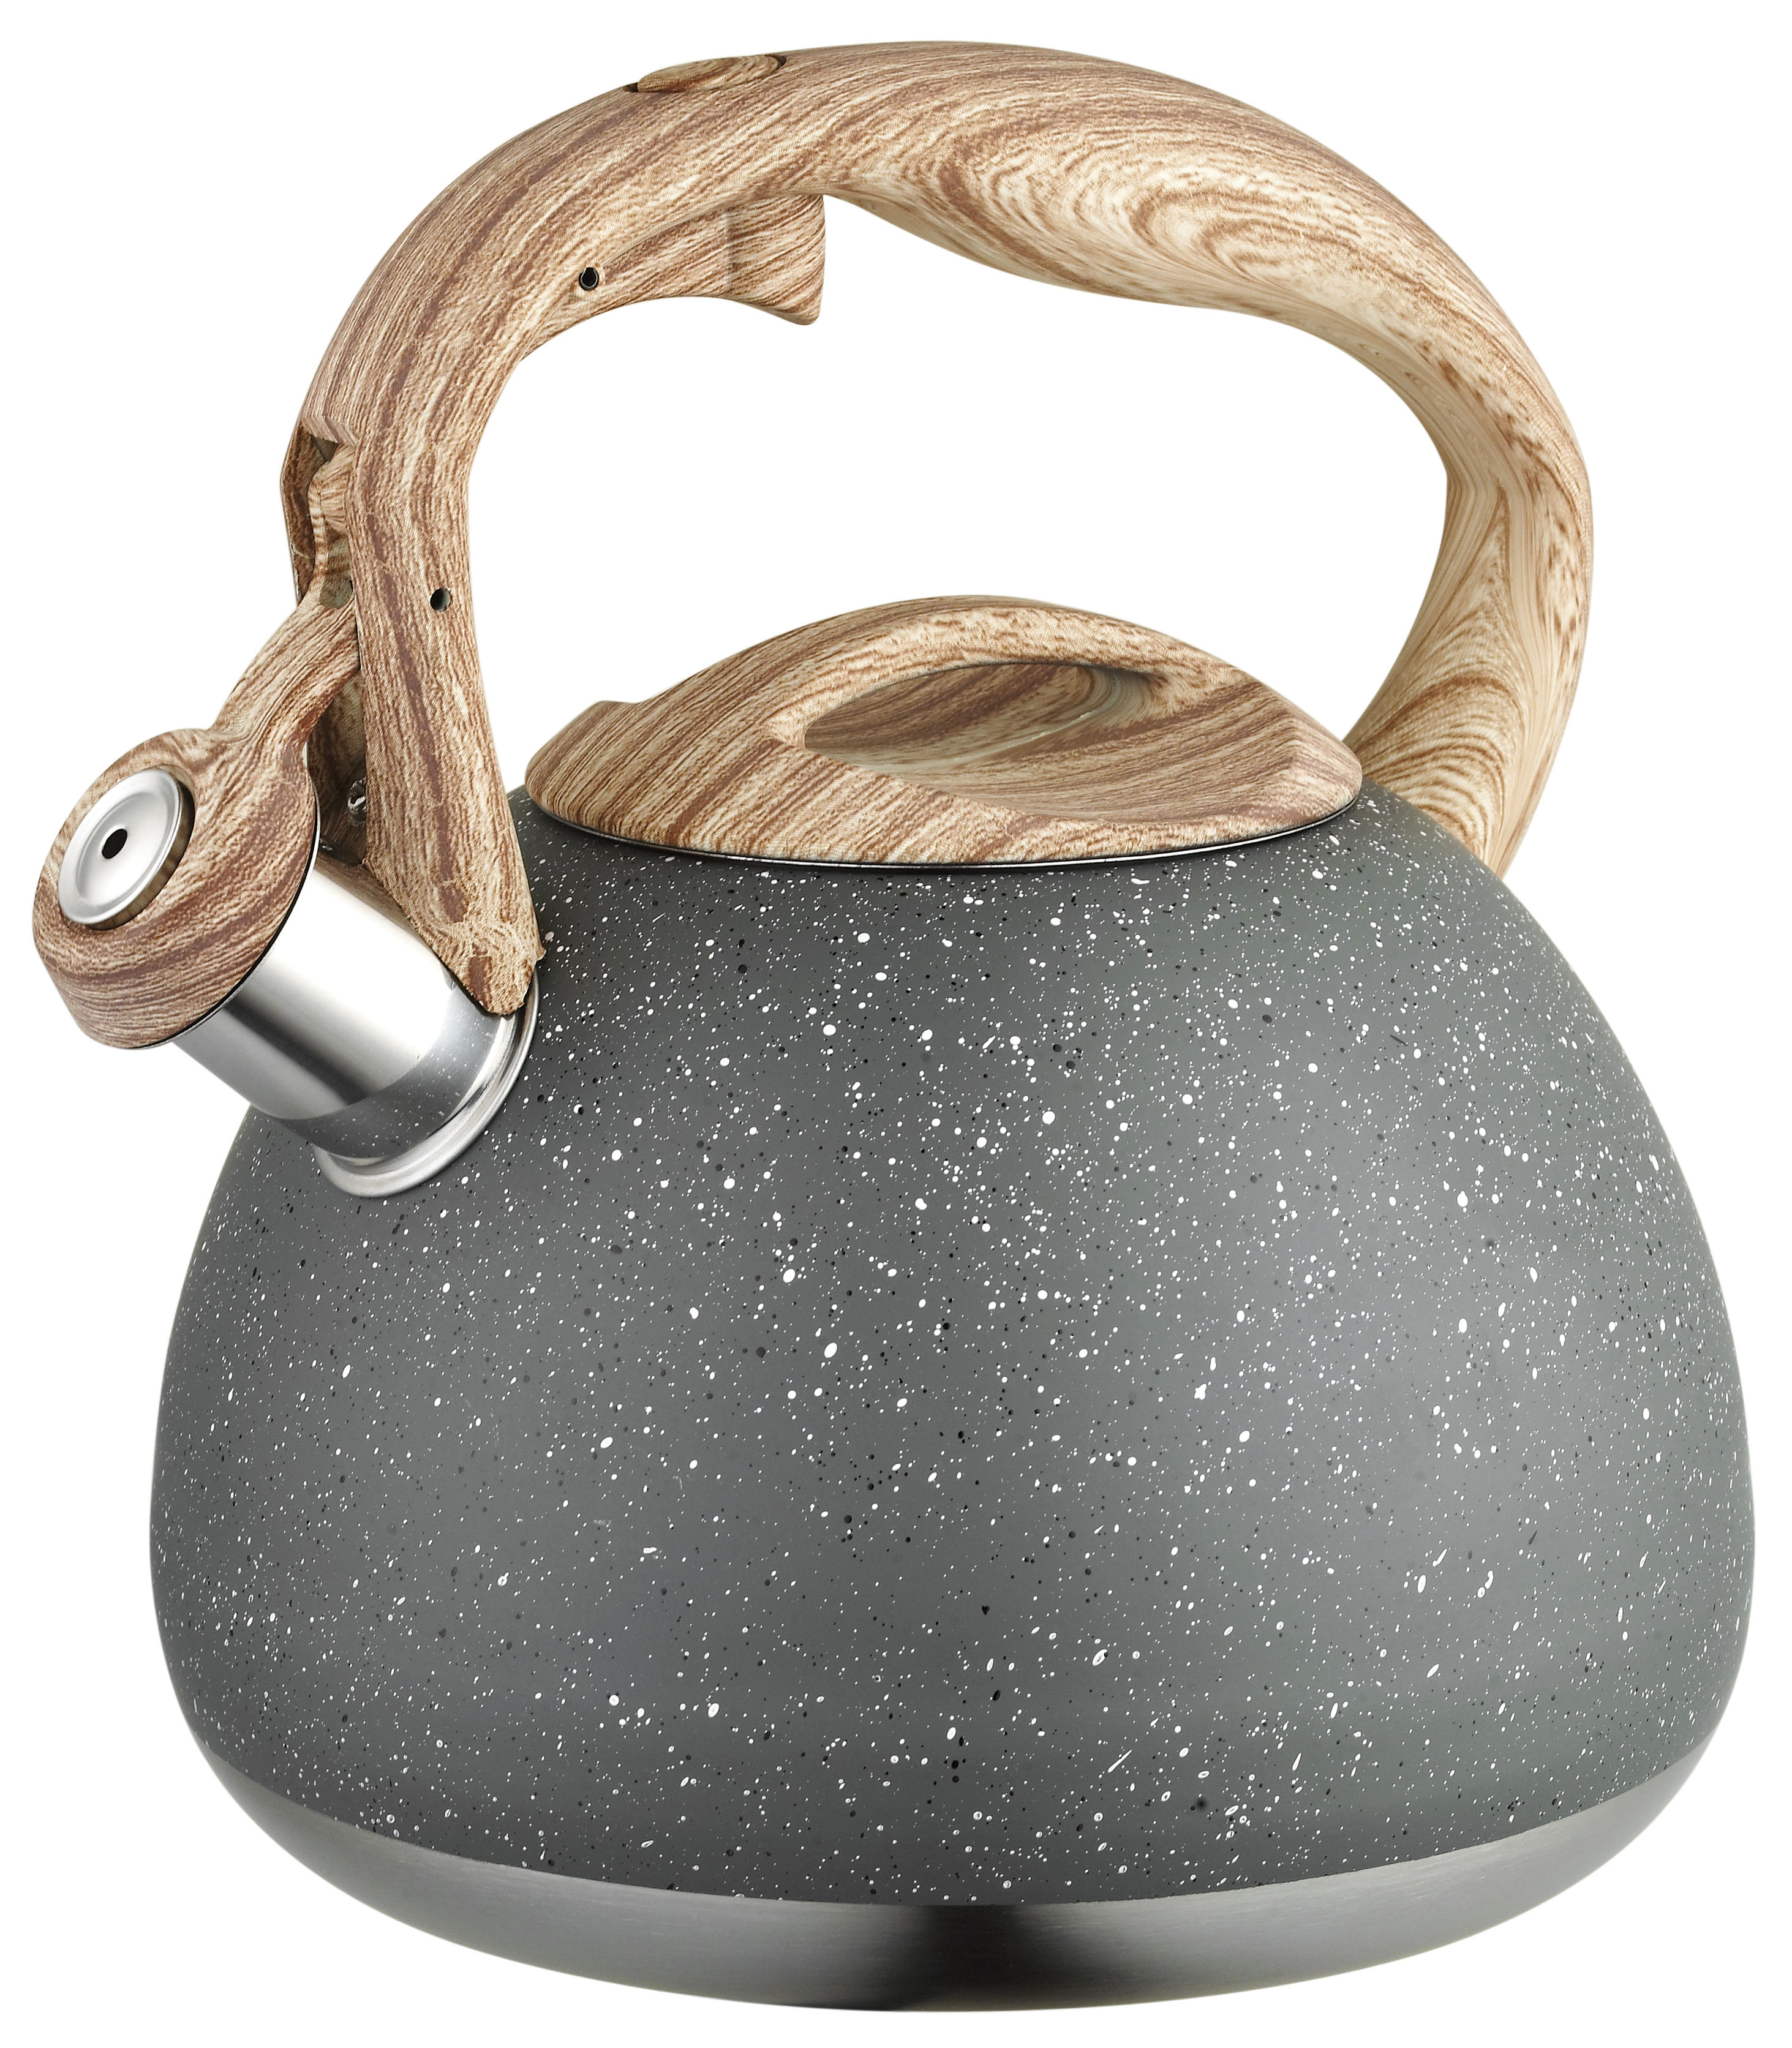 The Timeless Appeal of Whistle Kettles And The Quest for The Best Tea Kettle